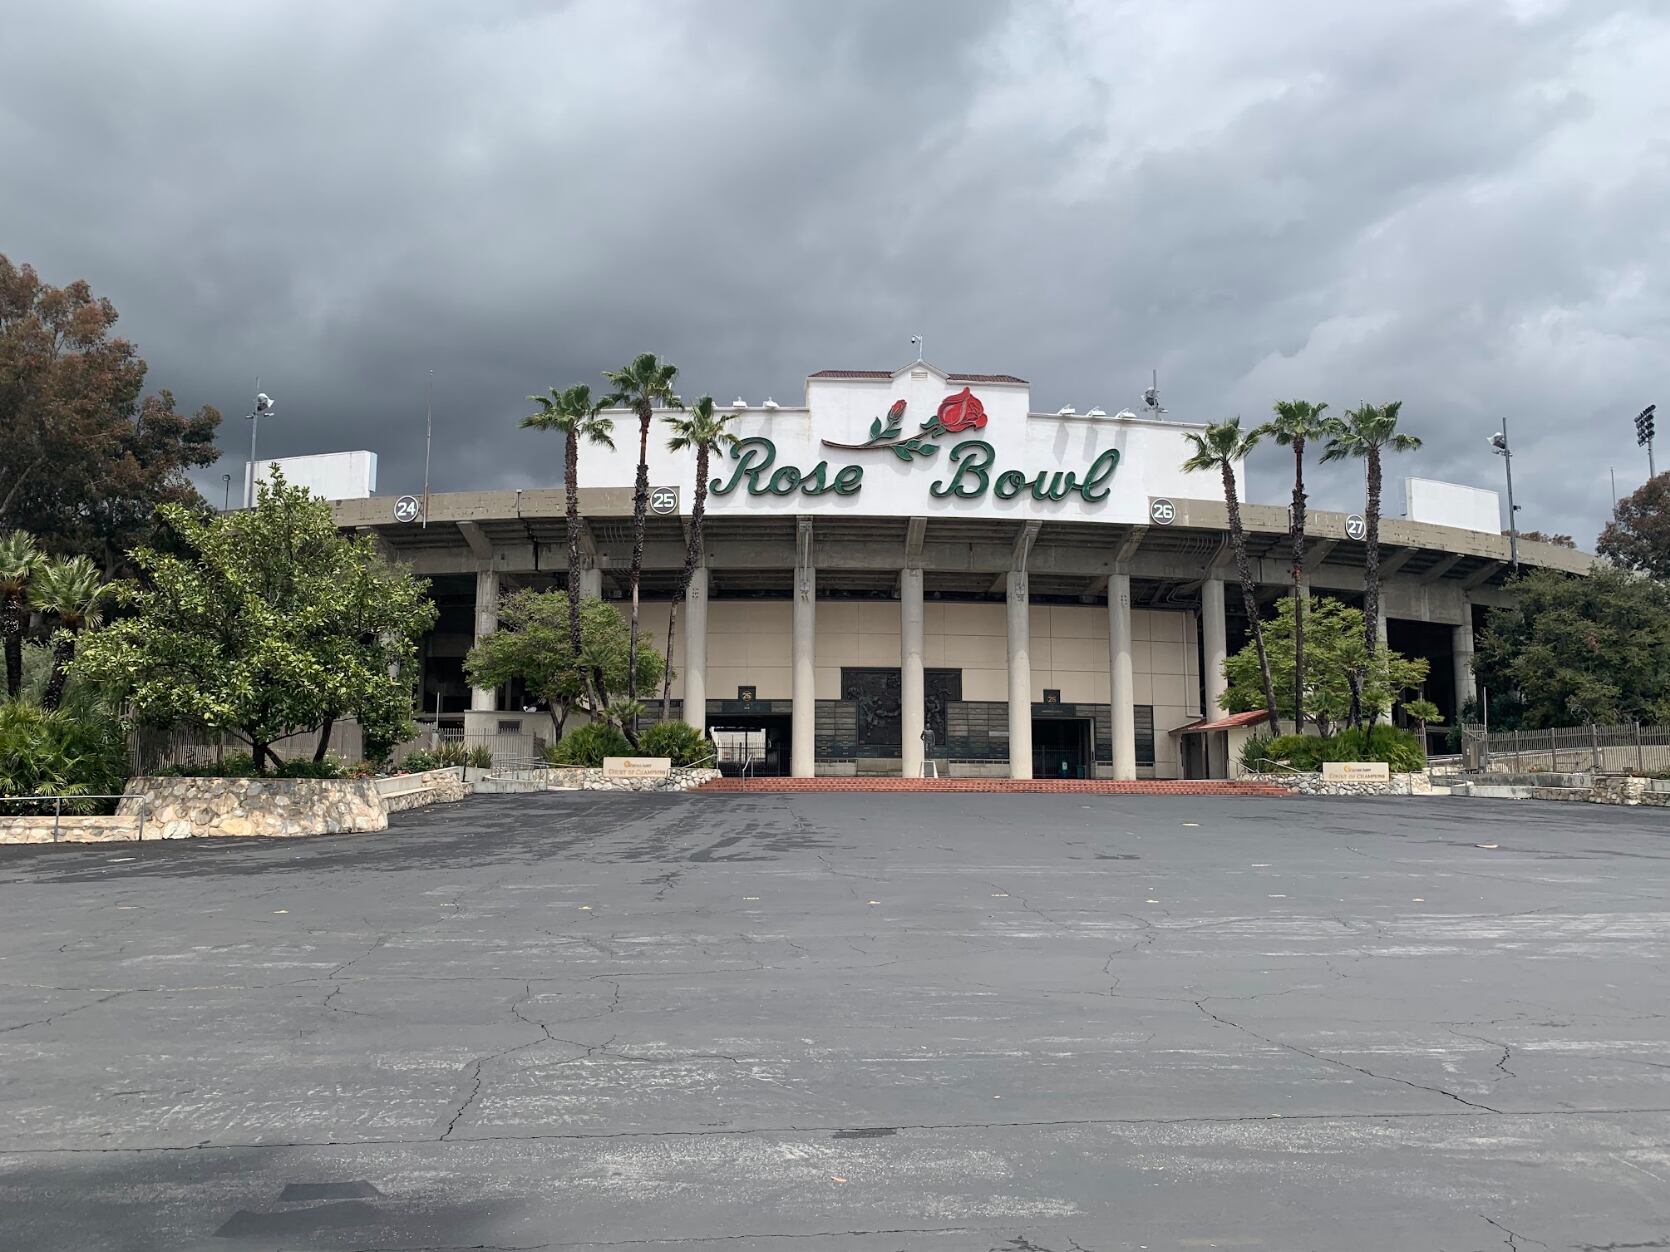 The crew paid a quick visit to Pasadena's Rose Bowl  